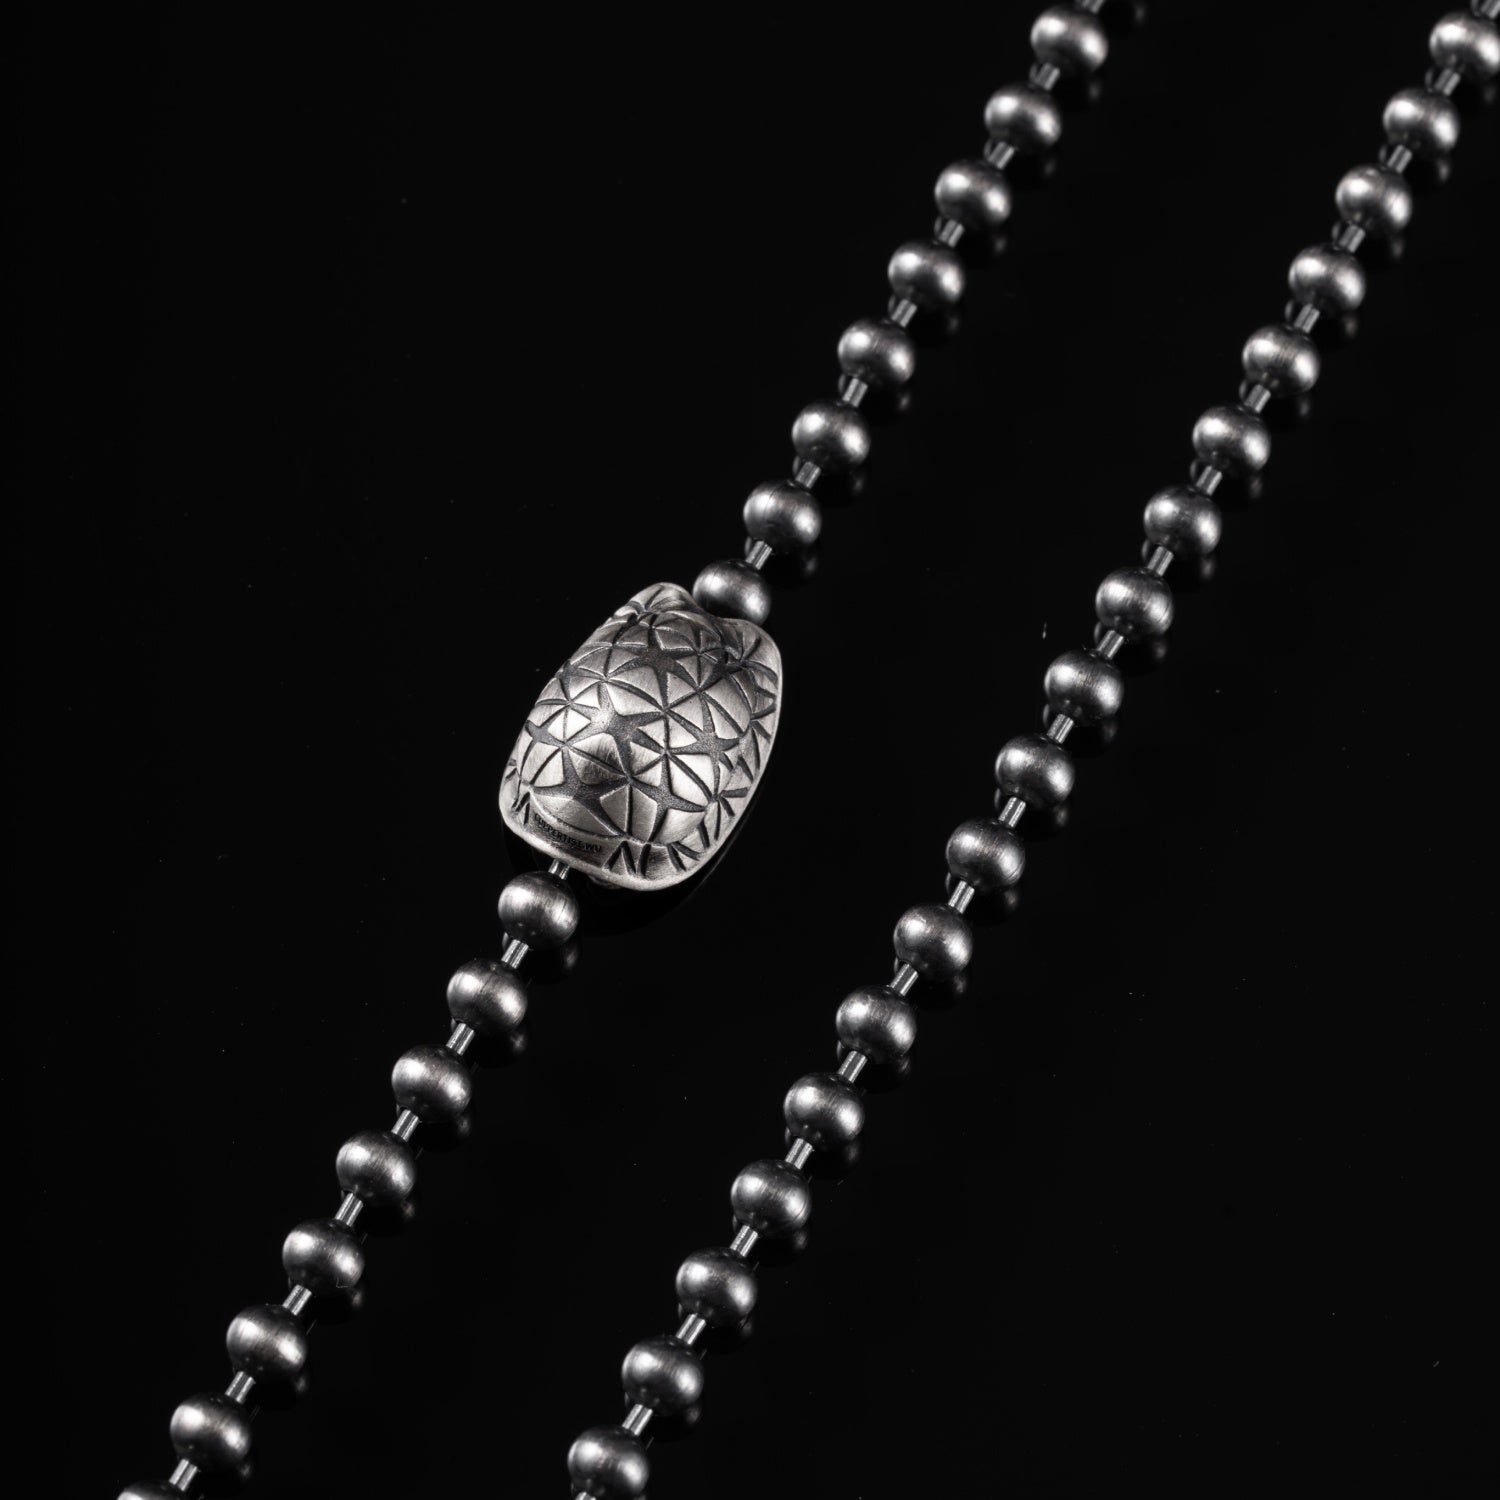 Star Tortoise Ball Chain Necklace - 4mm Oxidized Silver